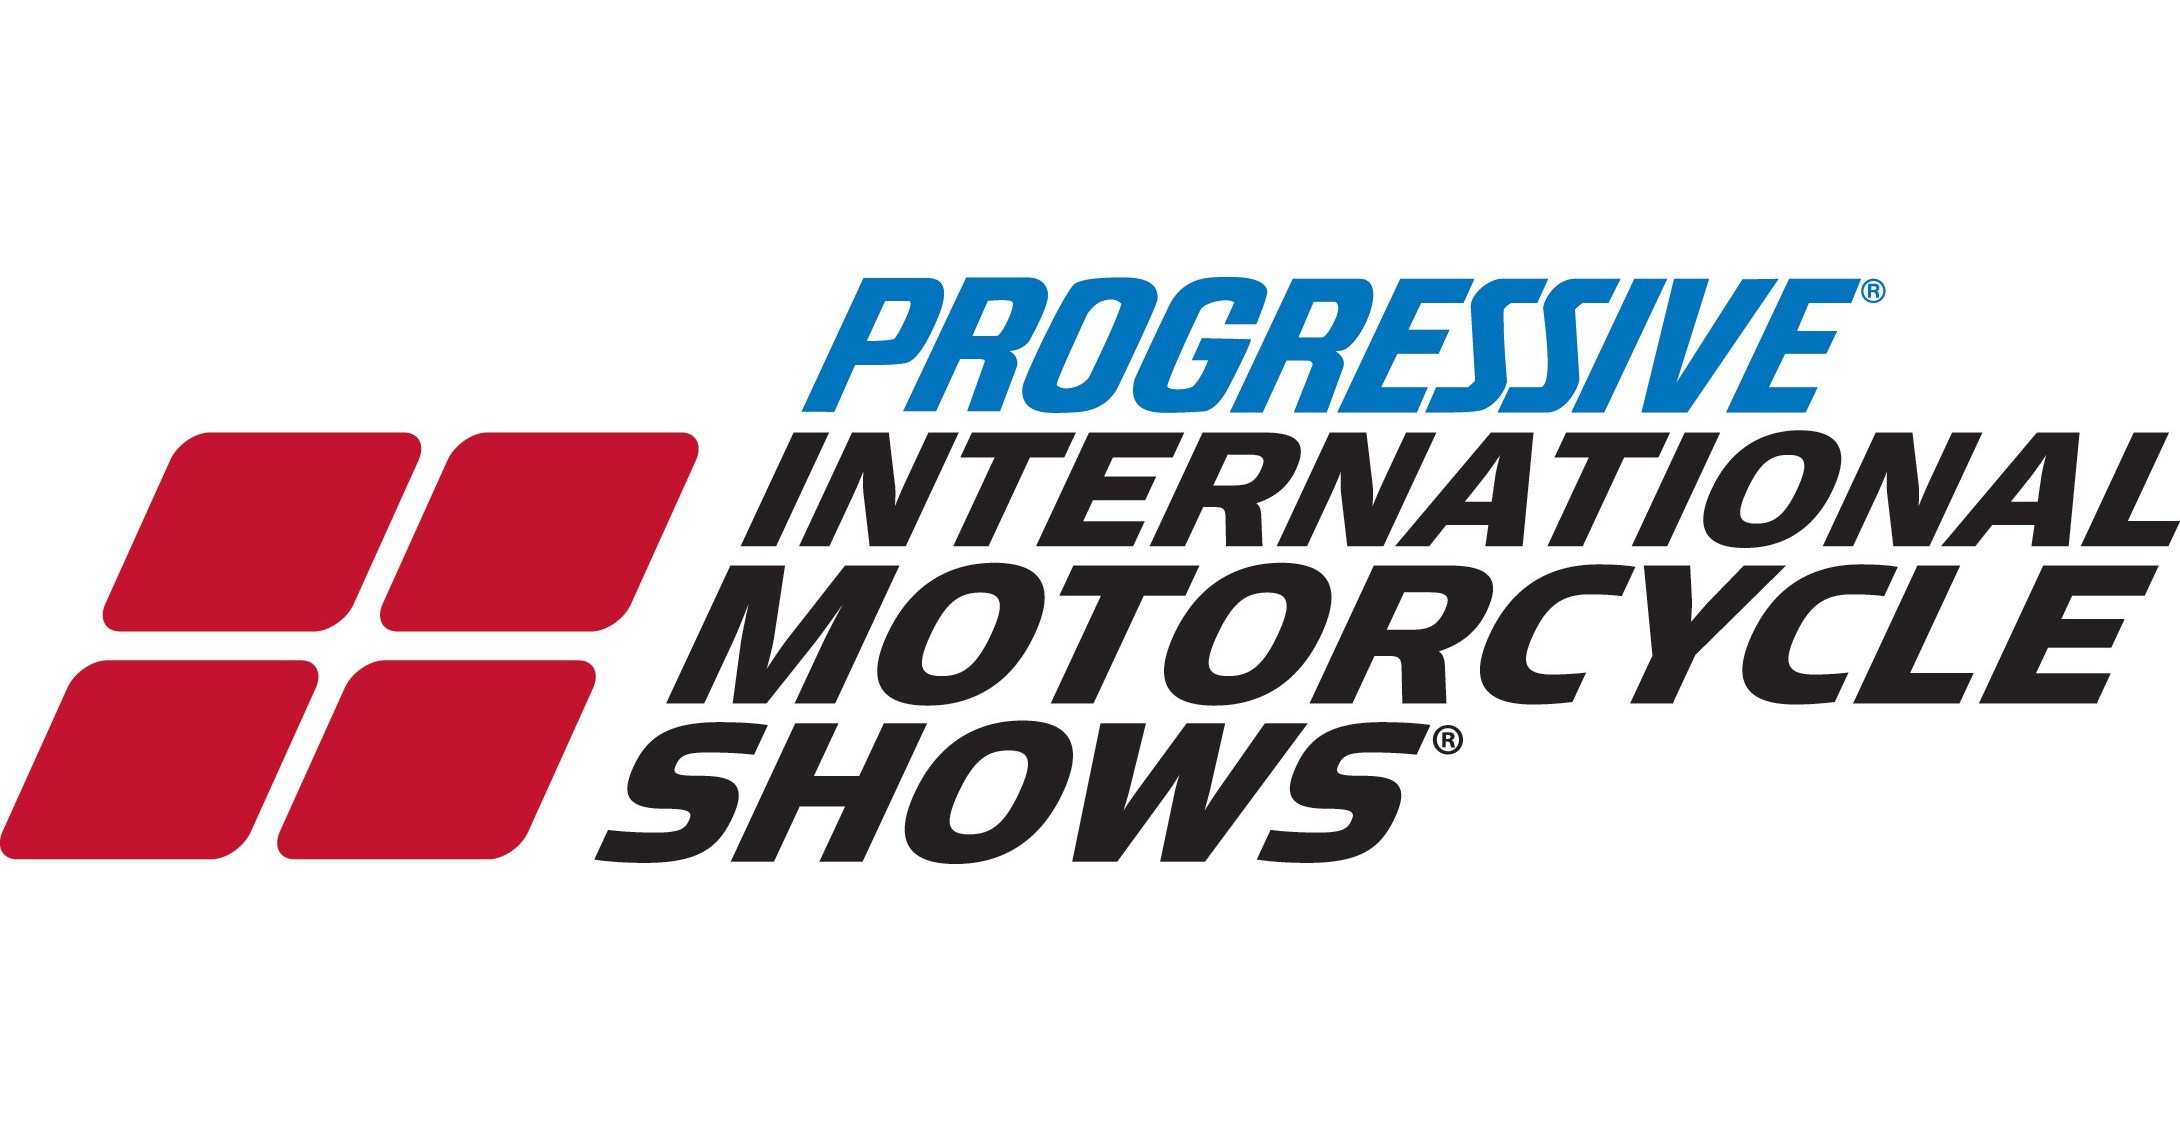 Progressive® International Motorcycle Shows® Receives Early Support